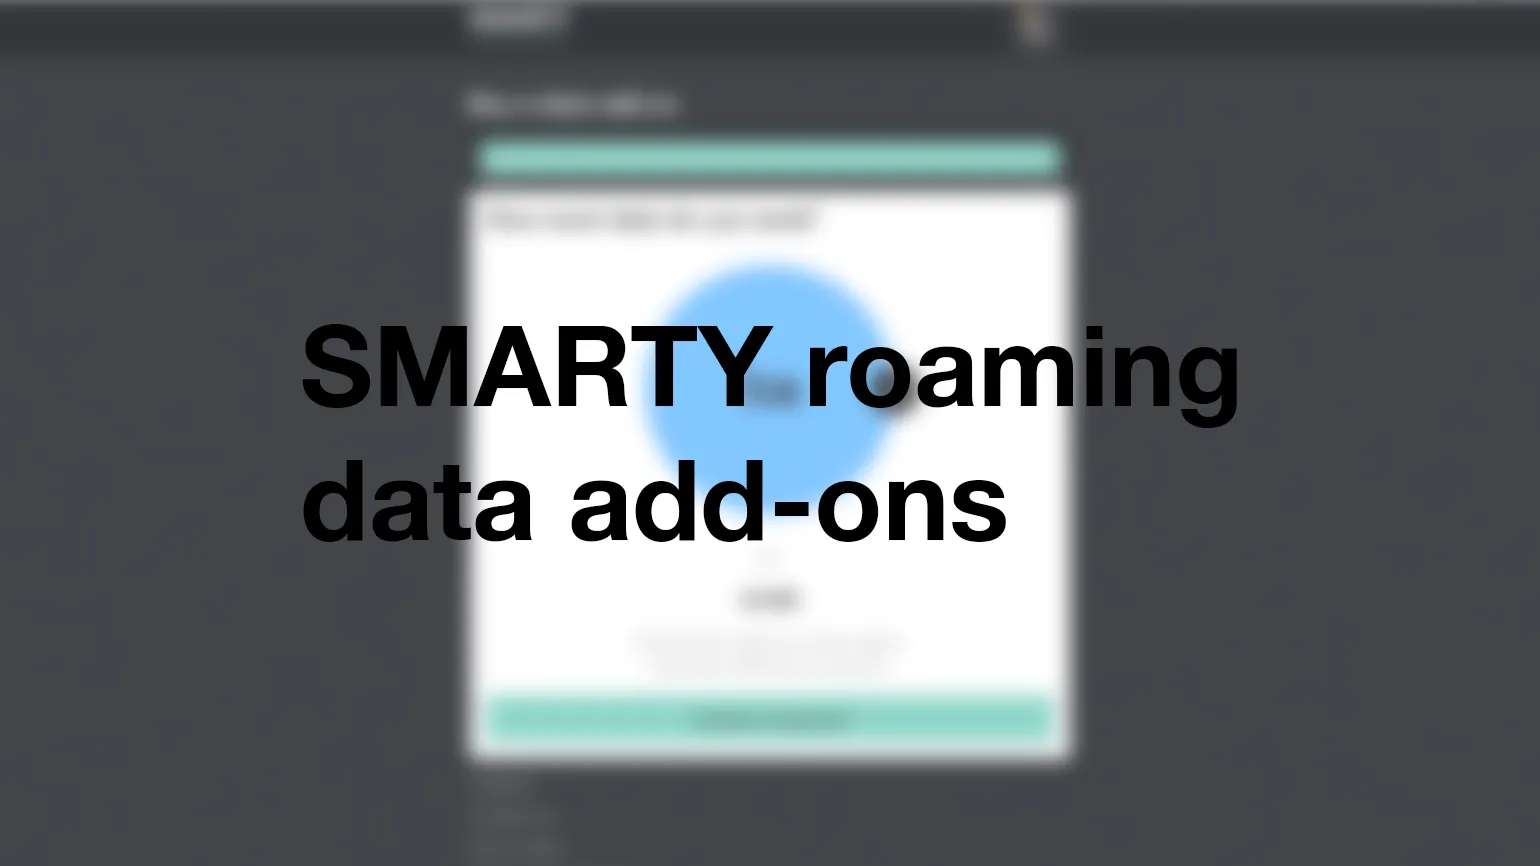 SMARTY data add-ons when roaming